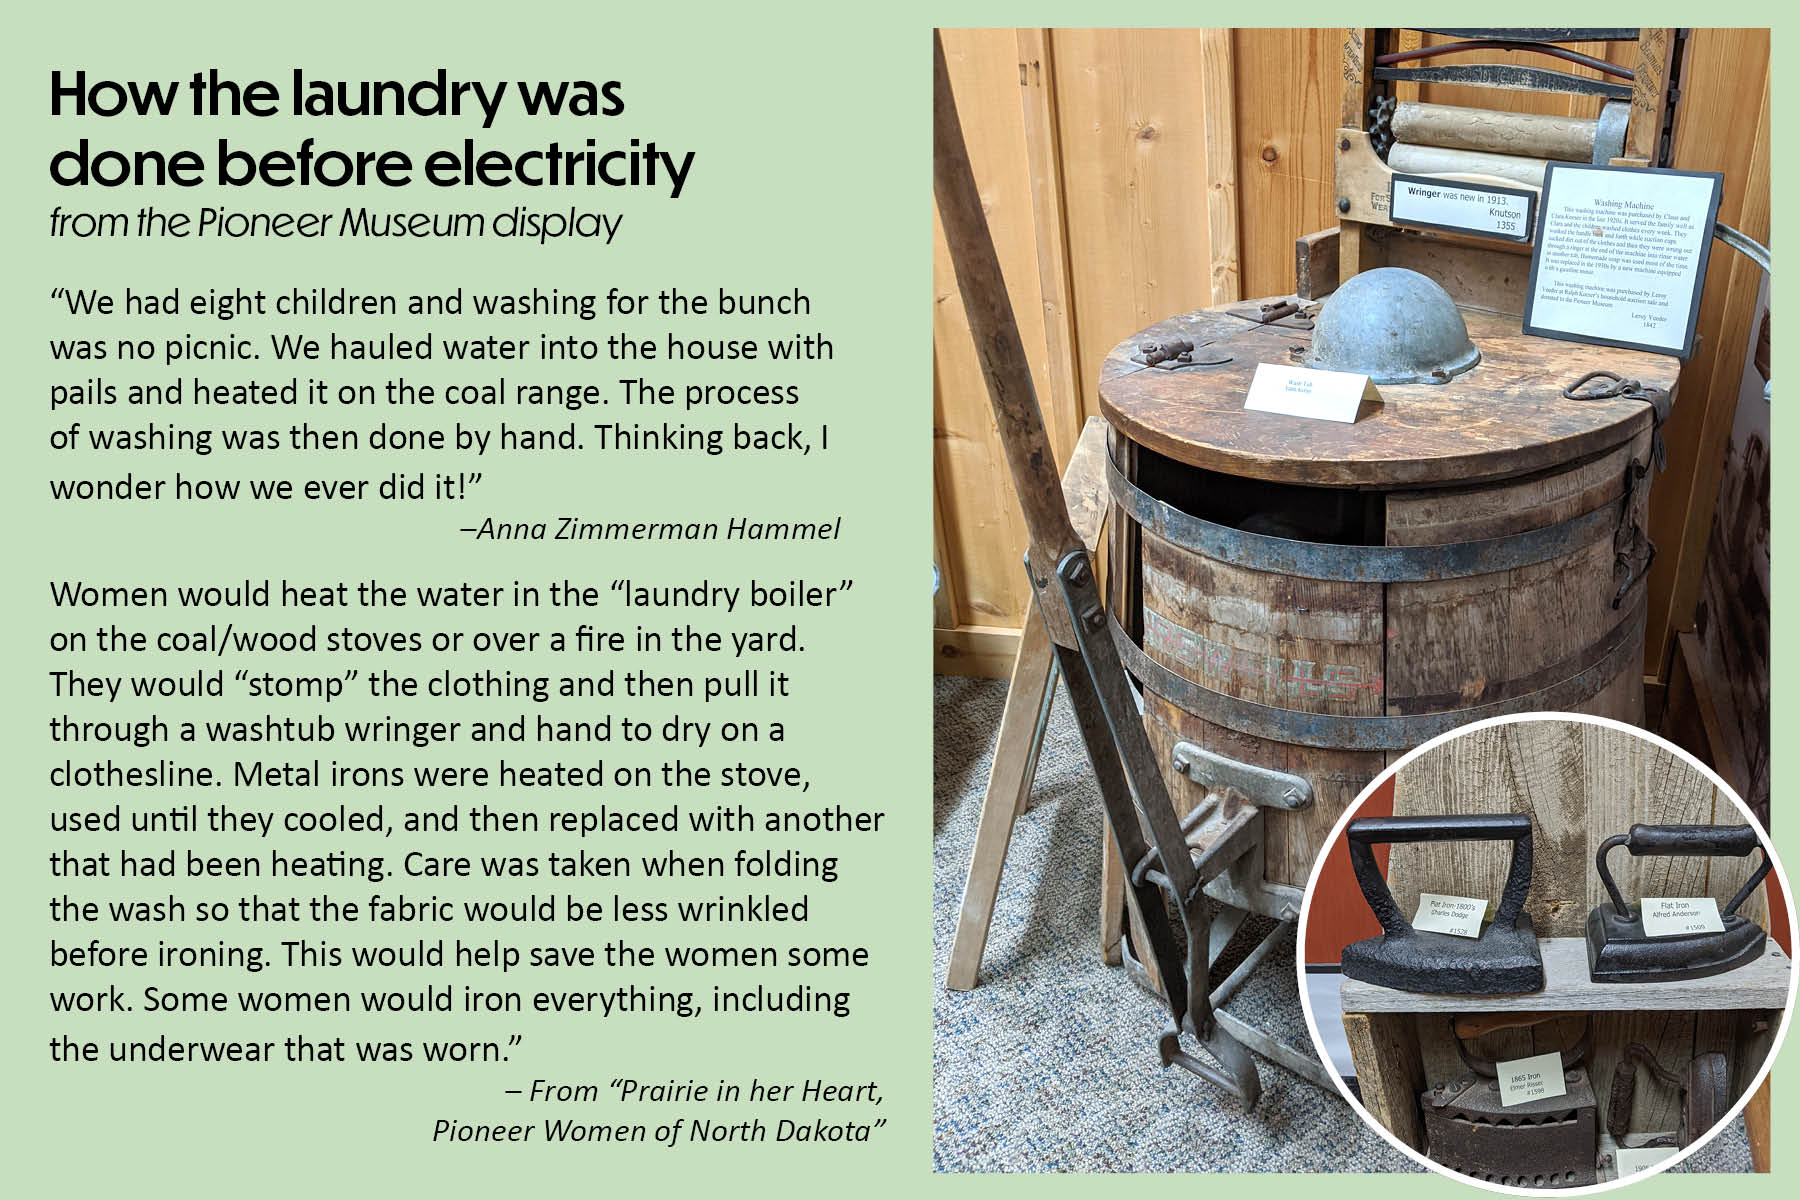 How the laundry was done before electricity